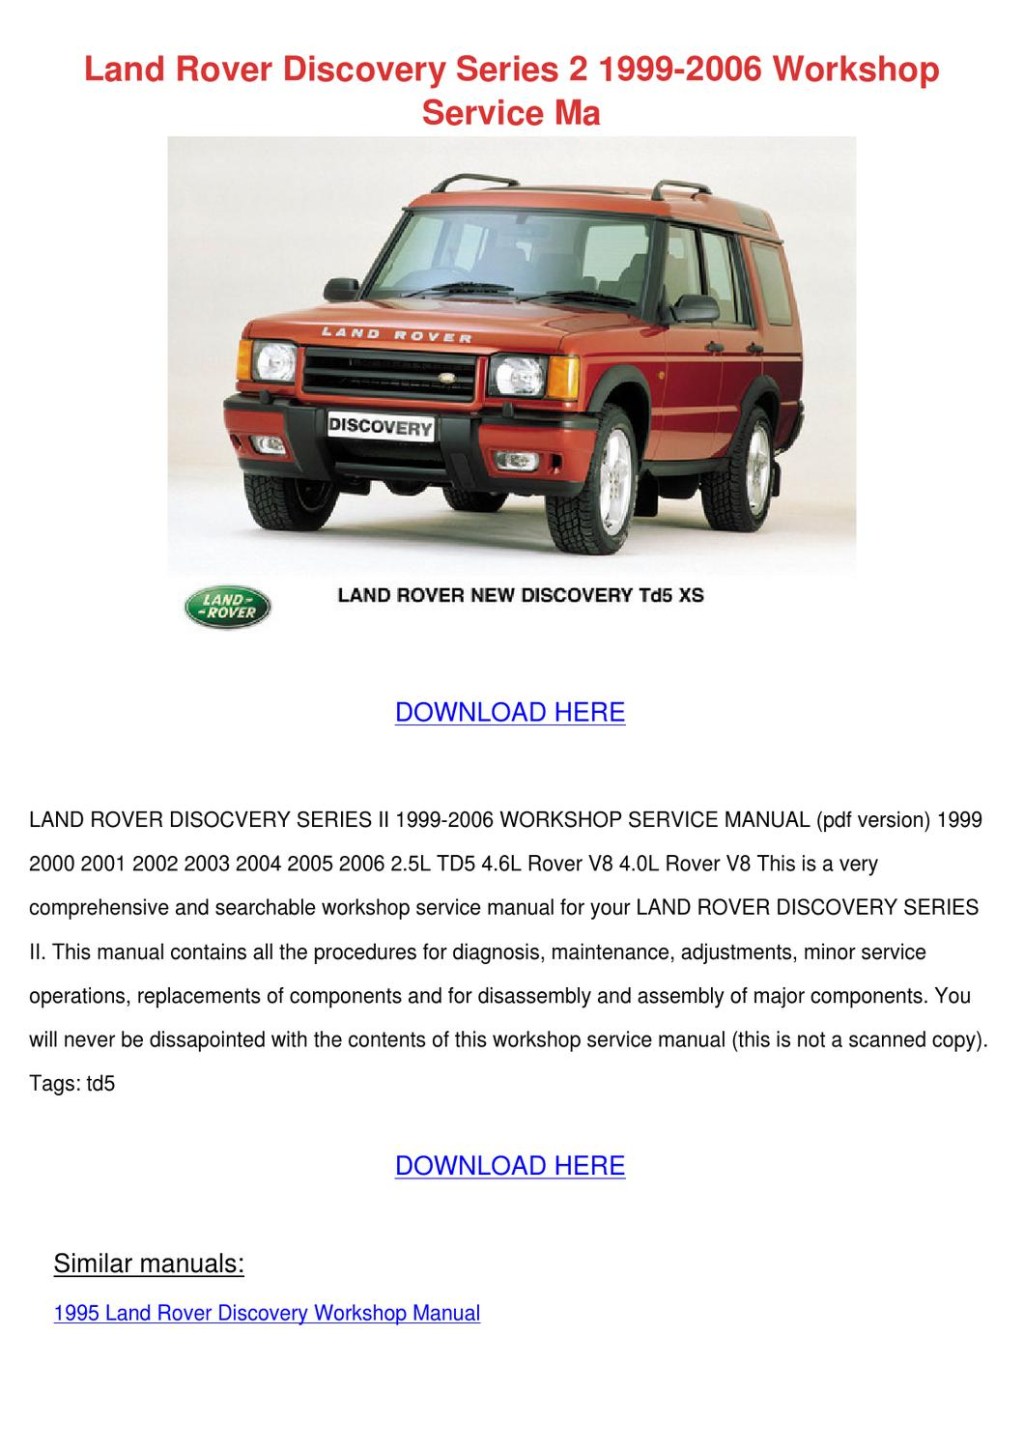 Picture of: Land Rover Discovery Series   006 Works by MarionKlein – Issuu